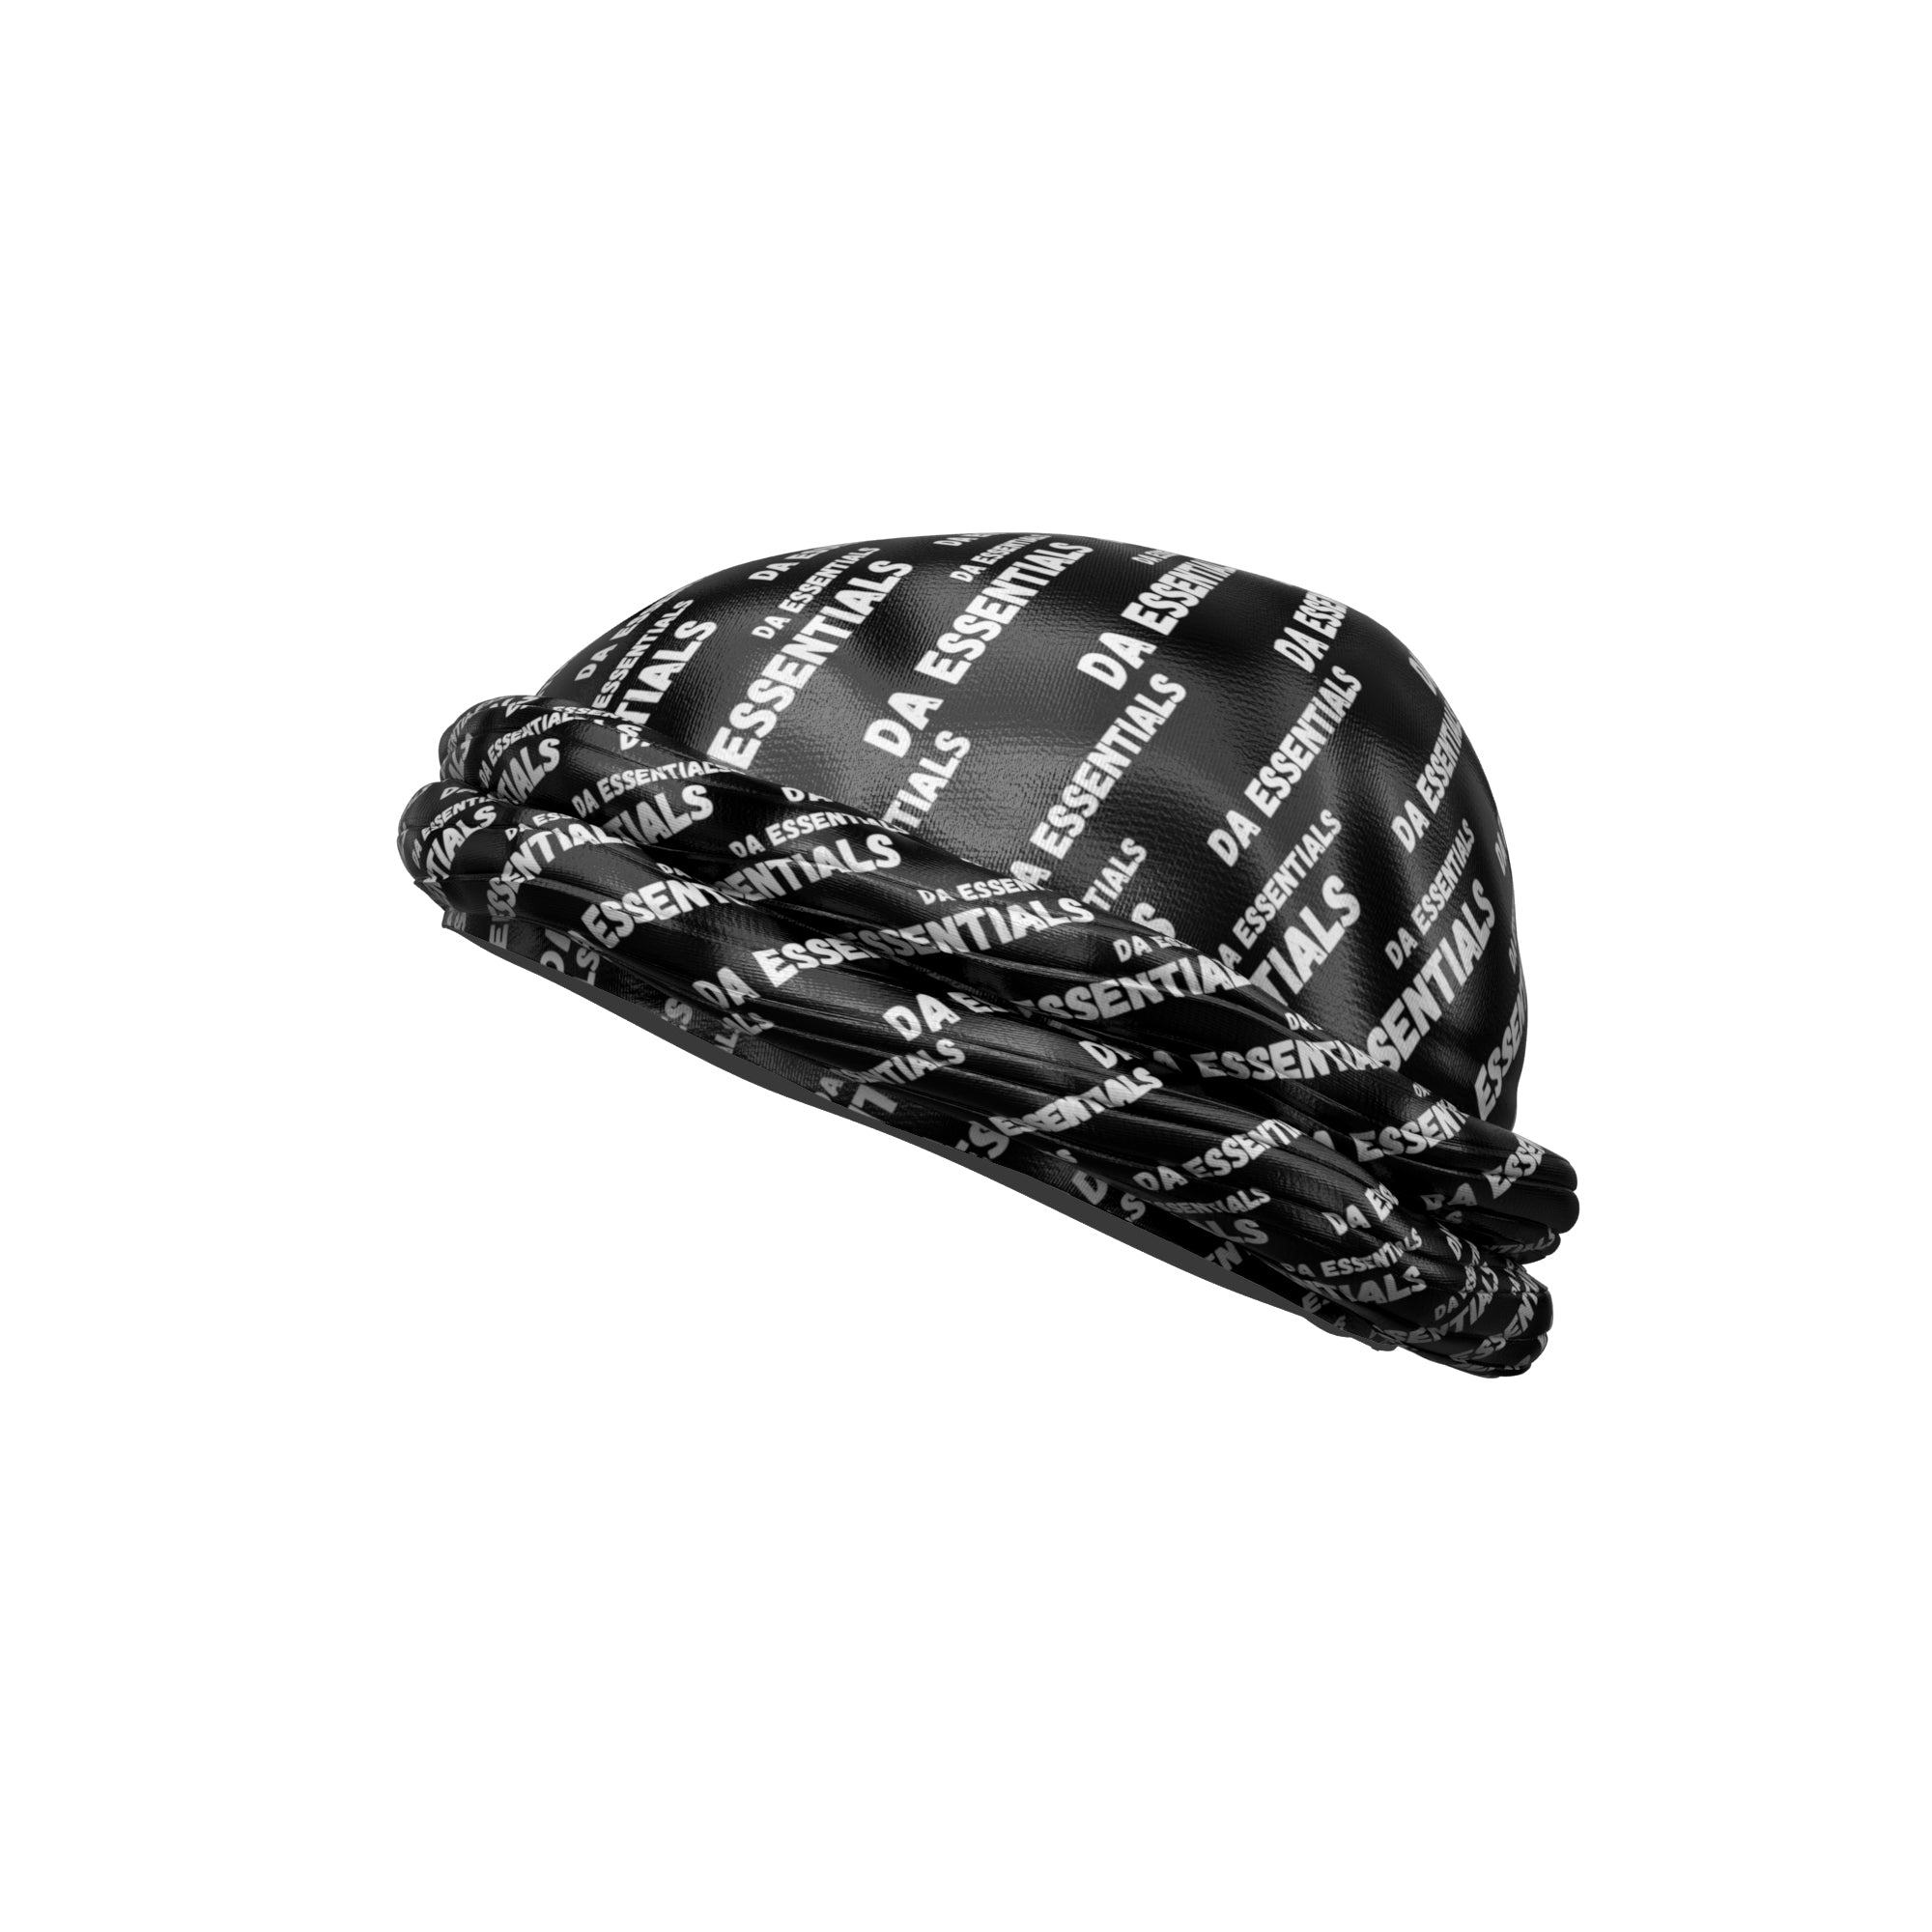 Turban For 360 Waves